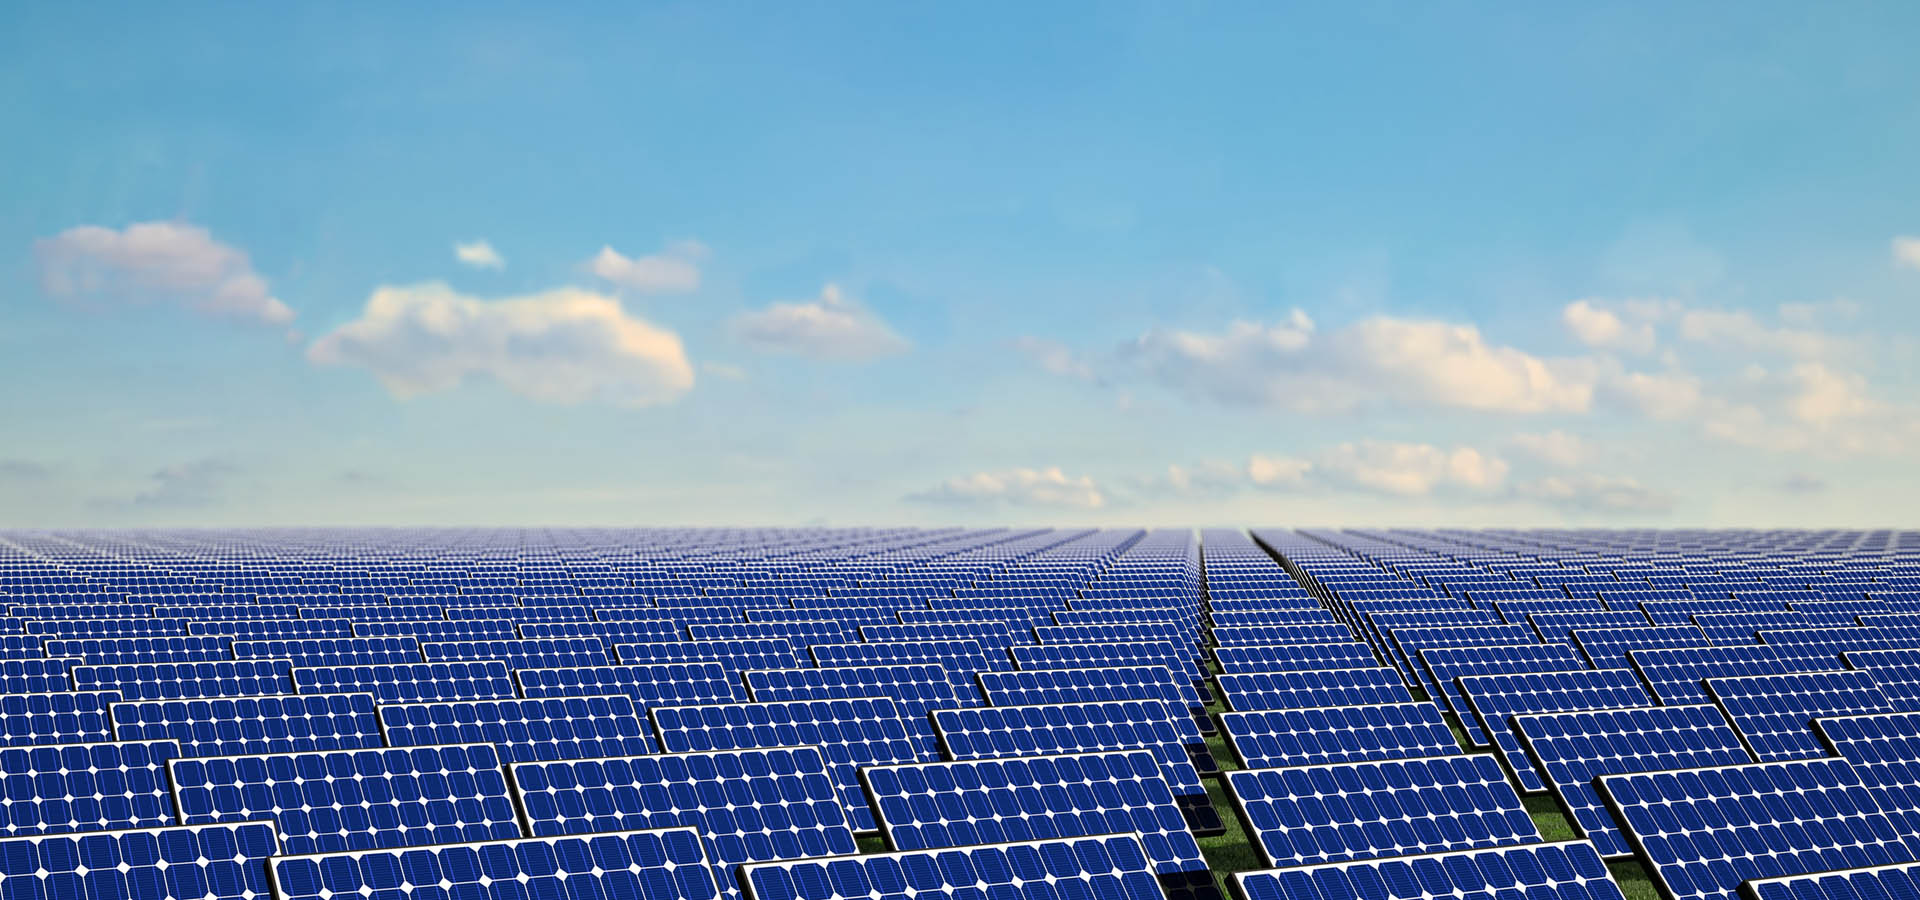 A Clearer Look at the Solar Module Market